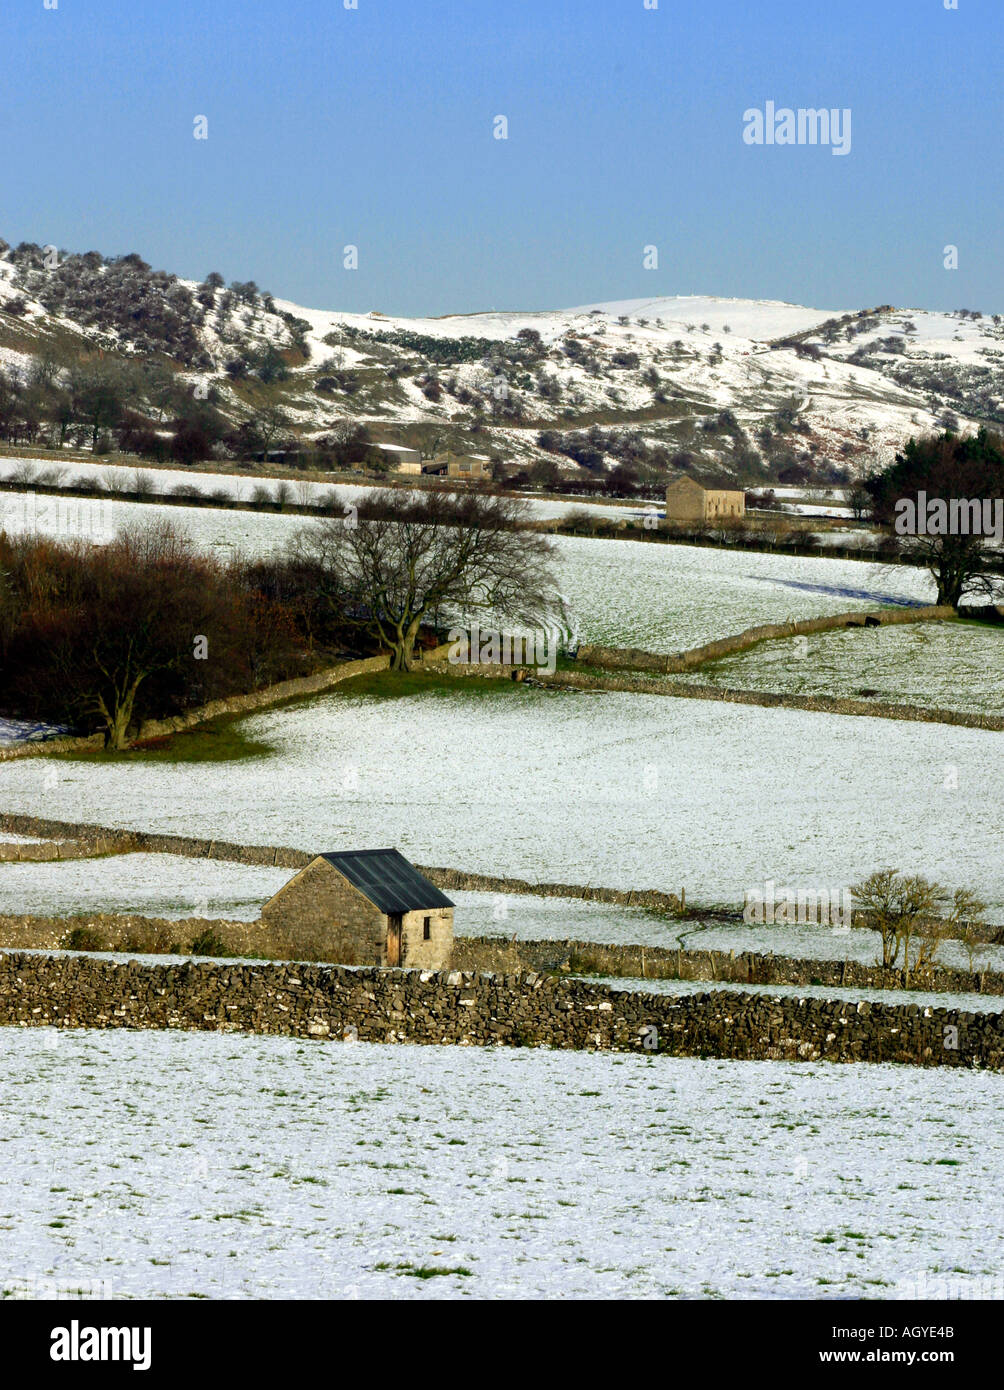 Snow covered landscape near Monsal Head in the Derbyshire Peak District England Stock Photo